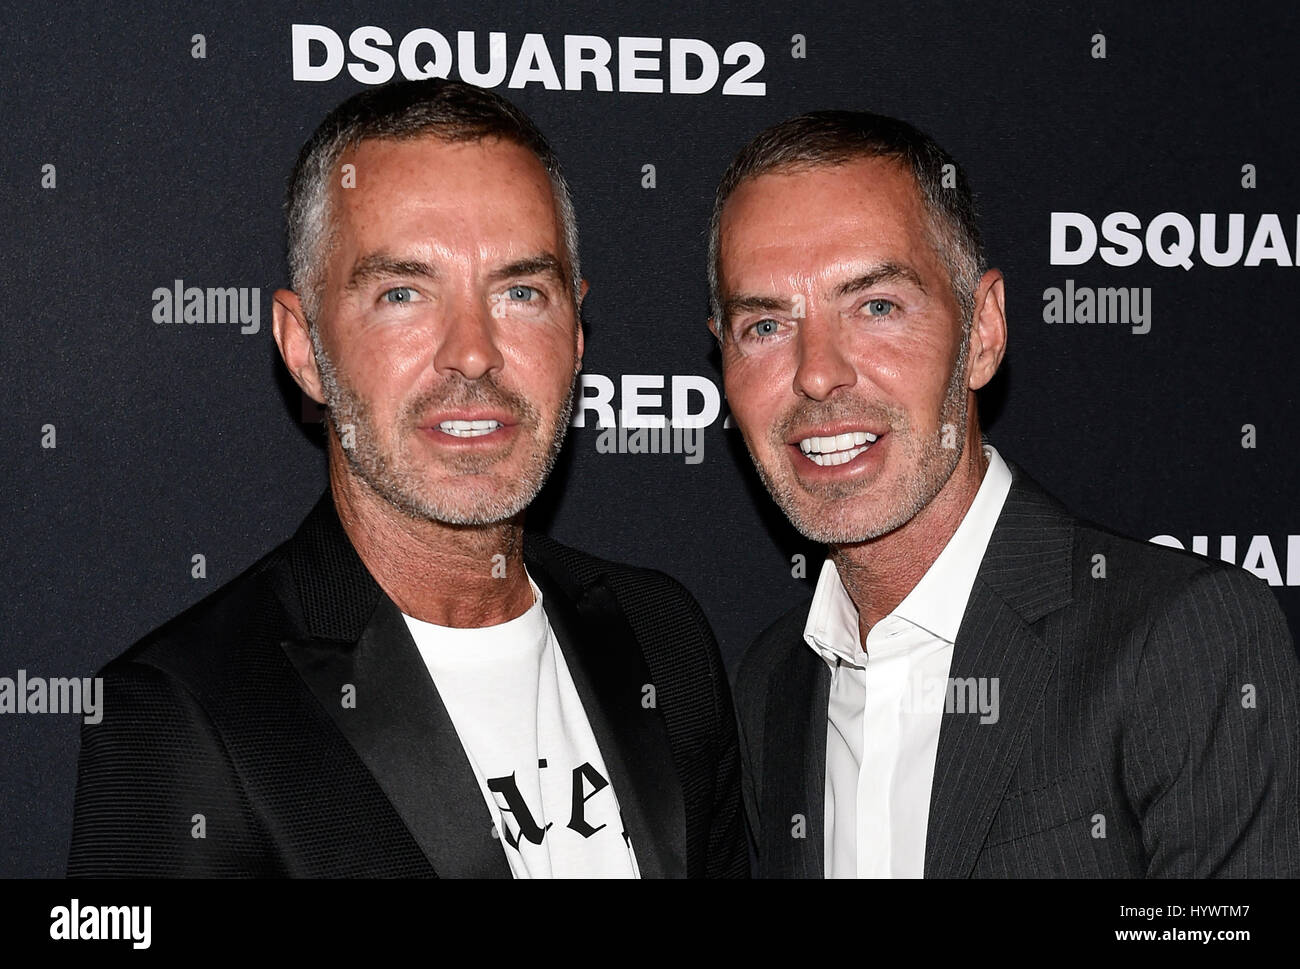 Fashion designers dan caten and dean caten of dsquared2 hi-res stock  photography and images - Alamy